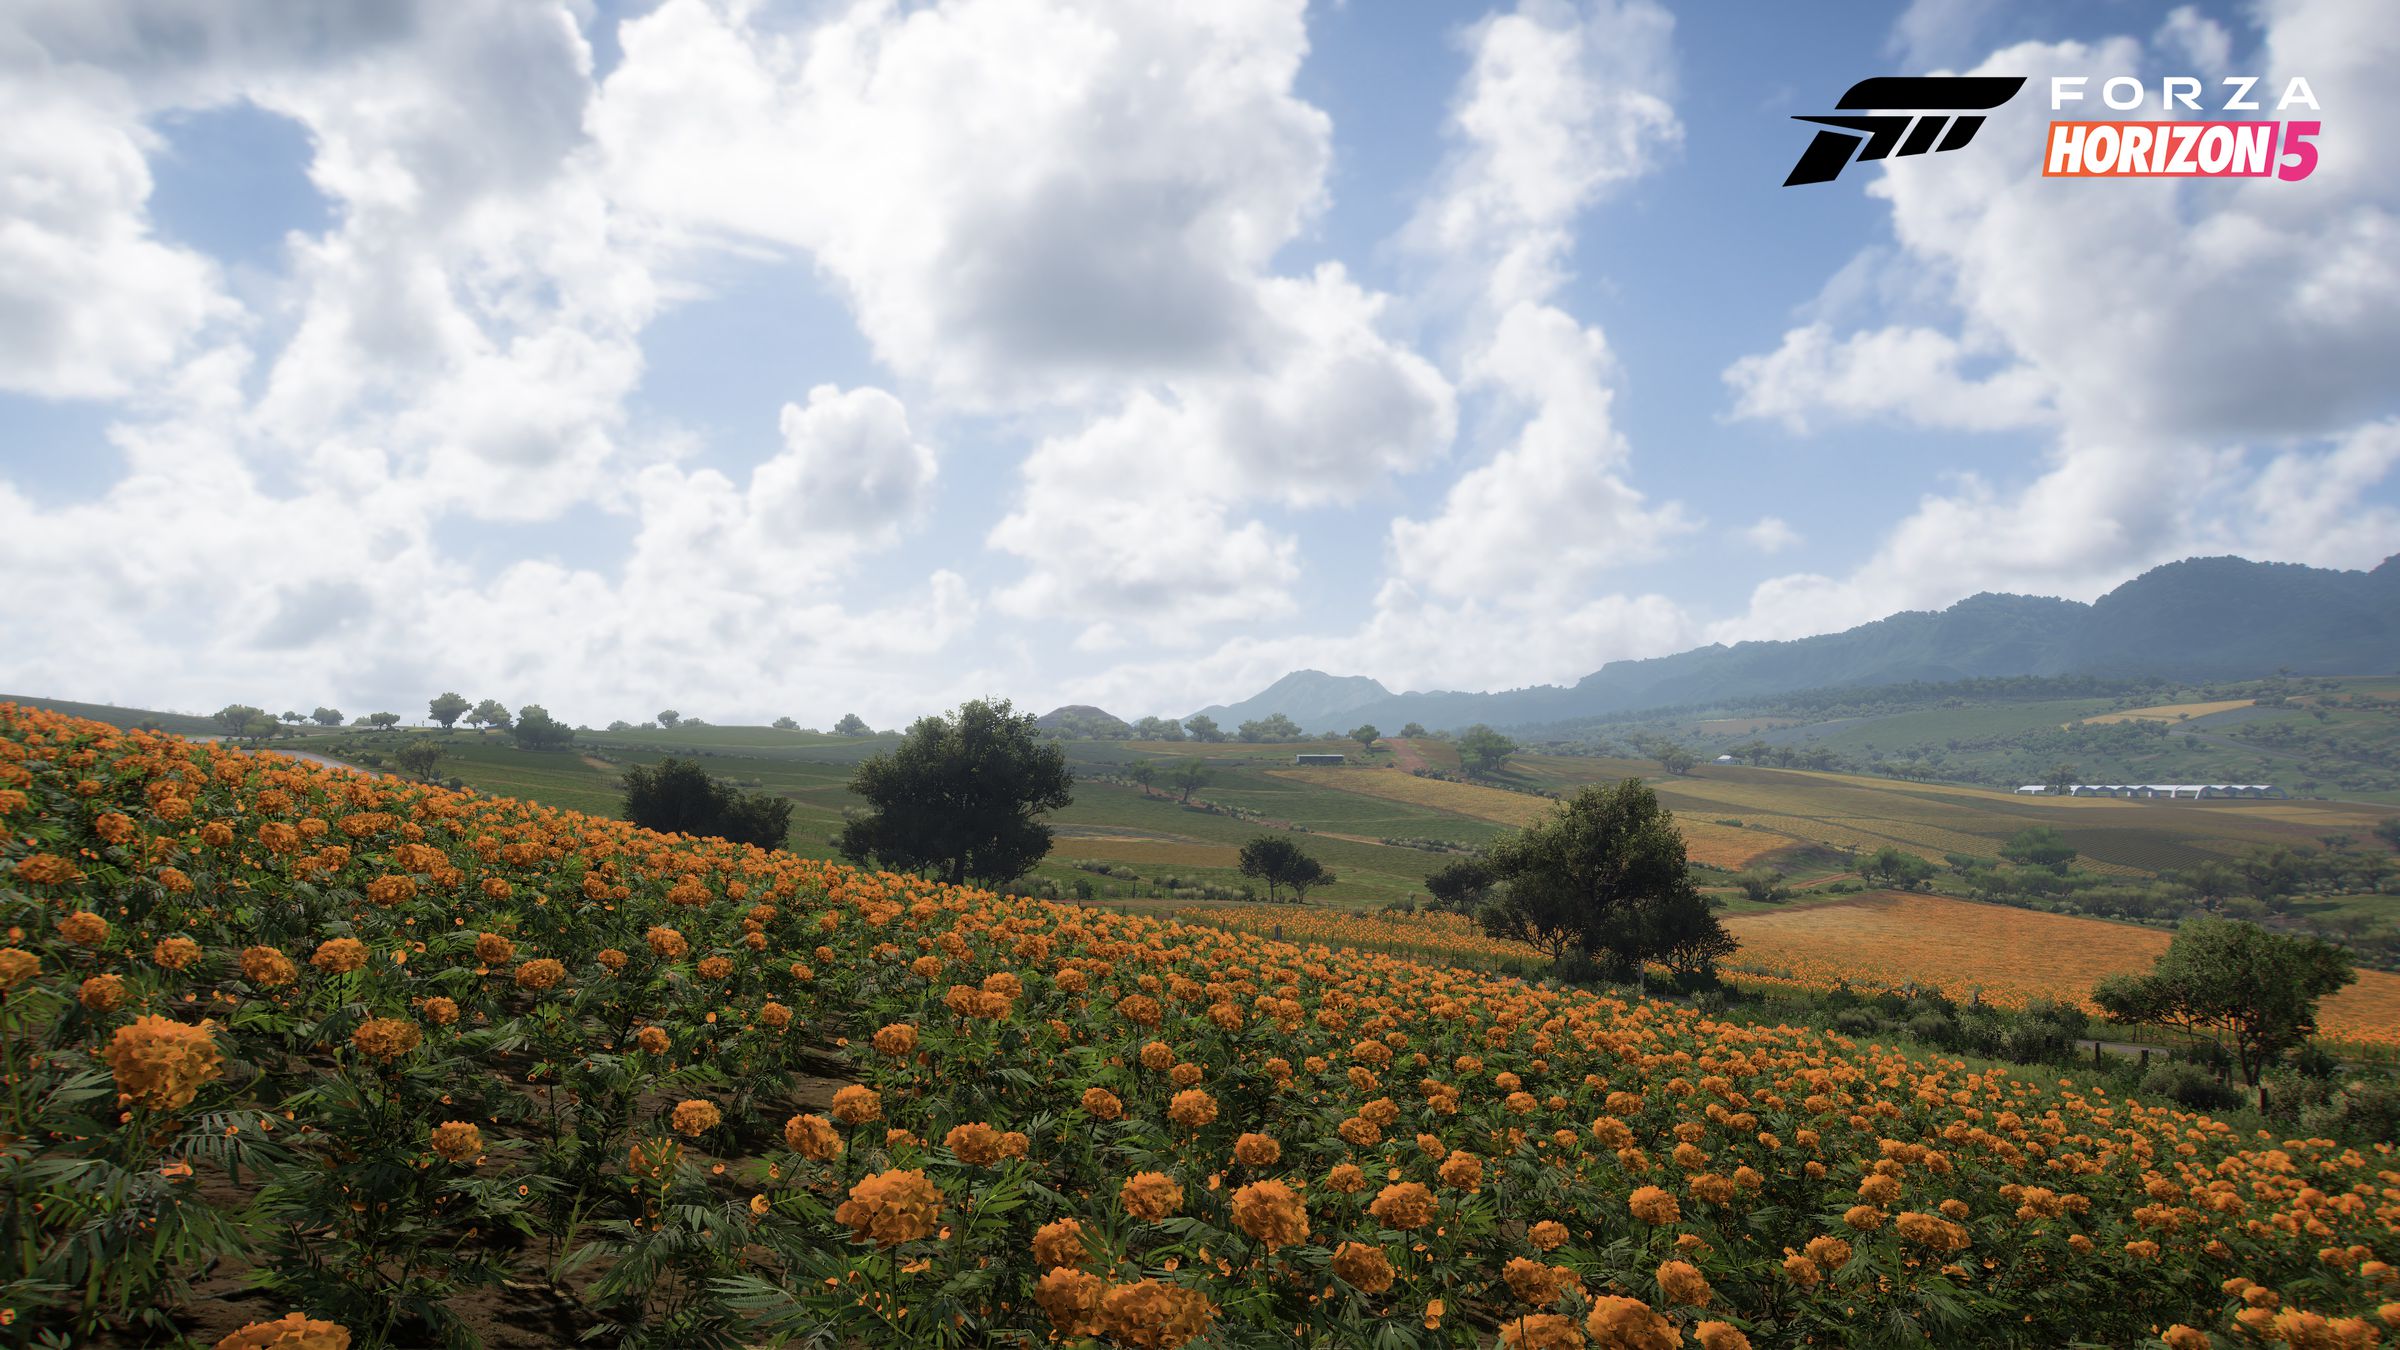 The farmland biome. Arceta said this is one of his favorite biomes because of the colors and palettes they can put into the area because of its agriculture.